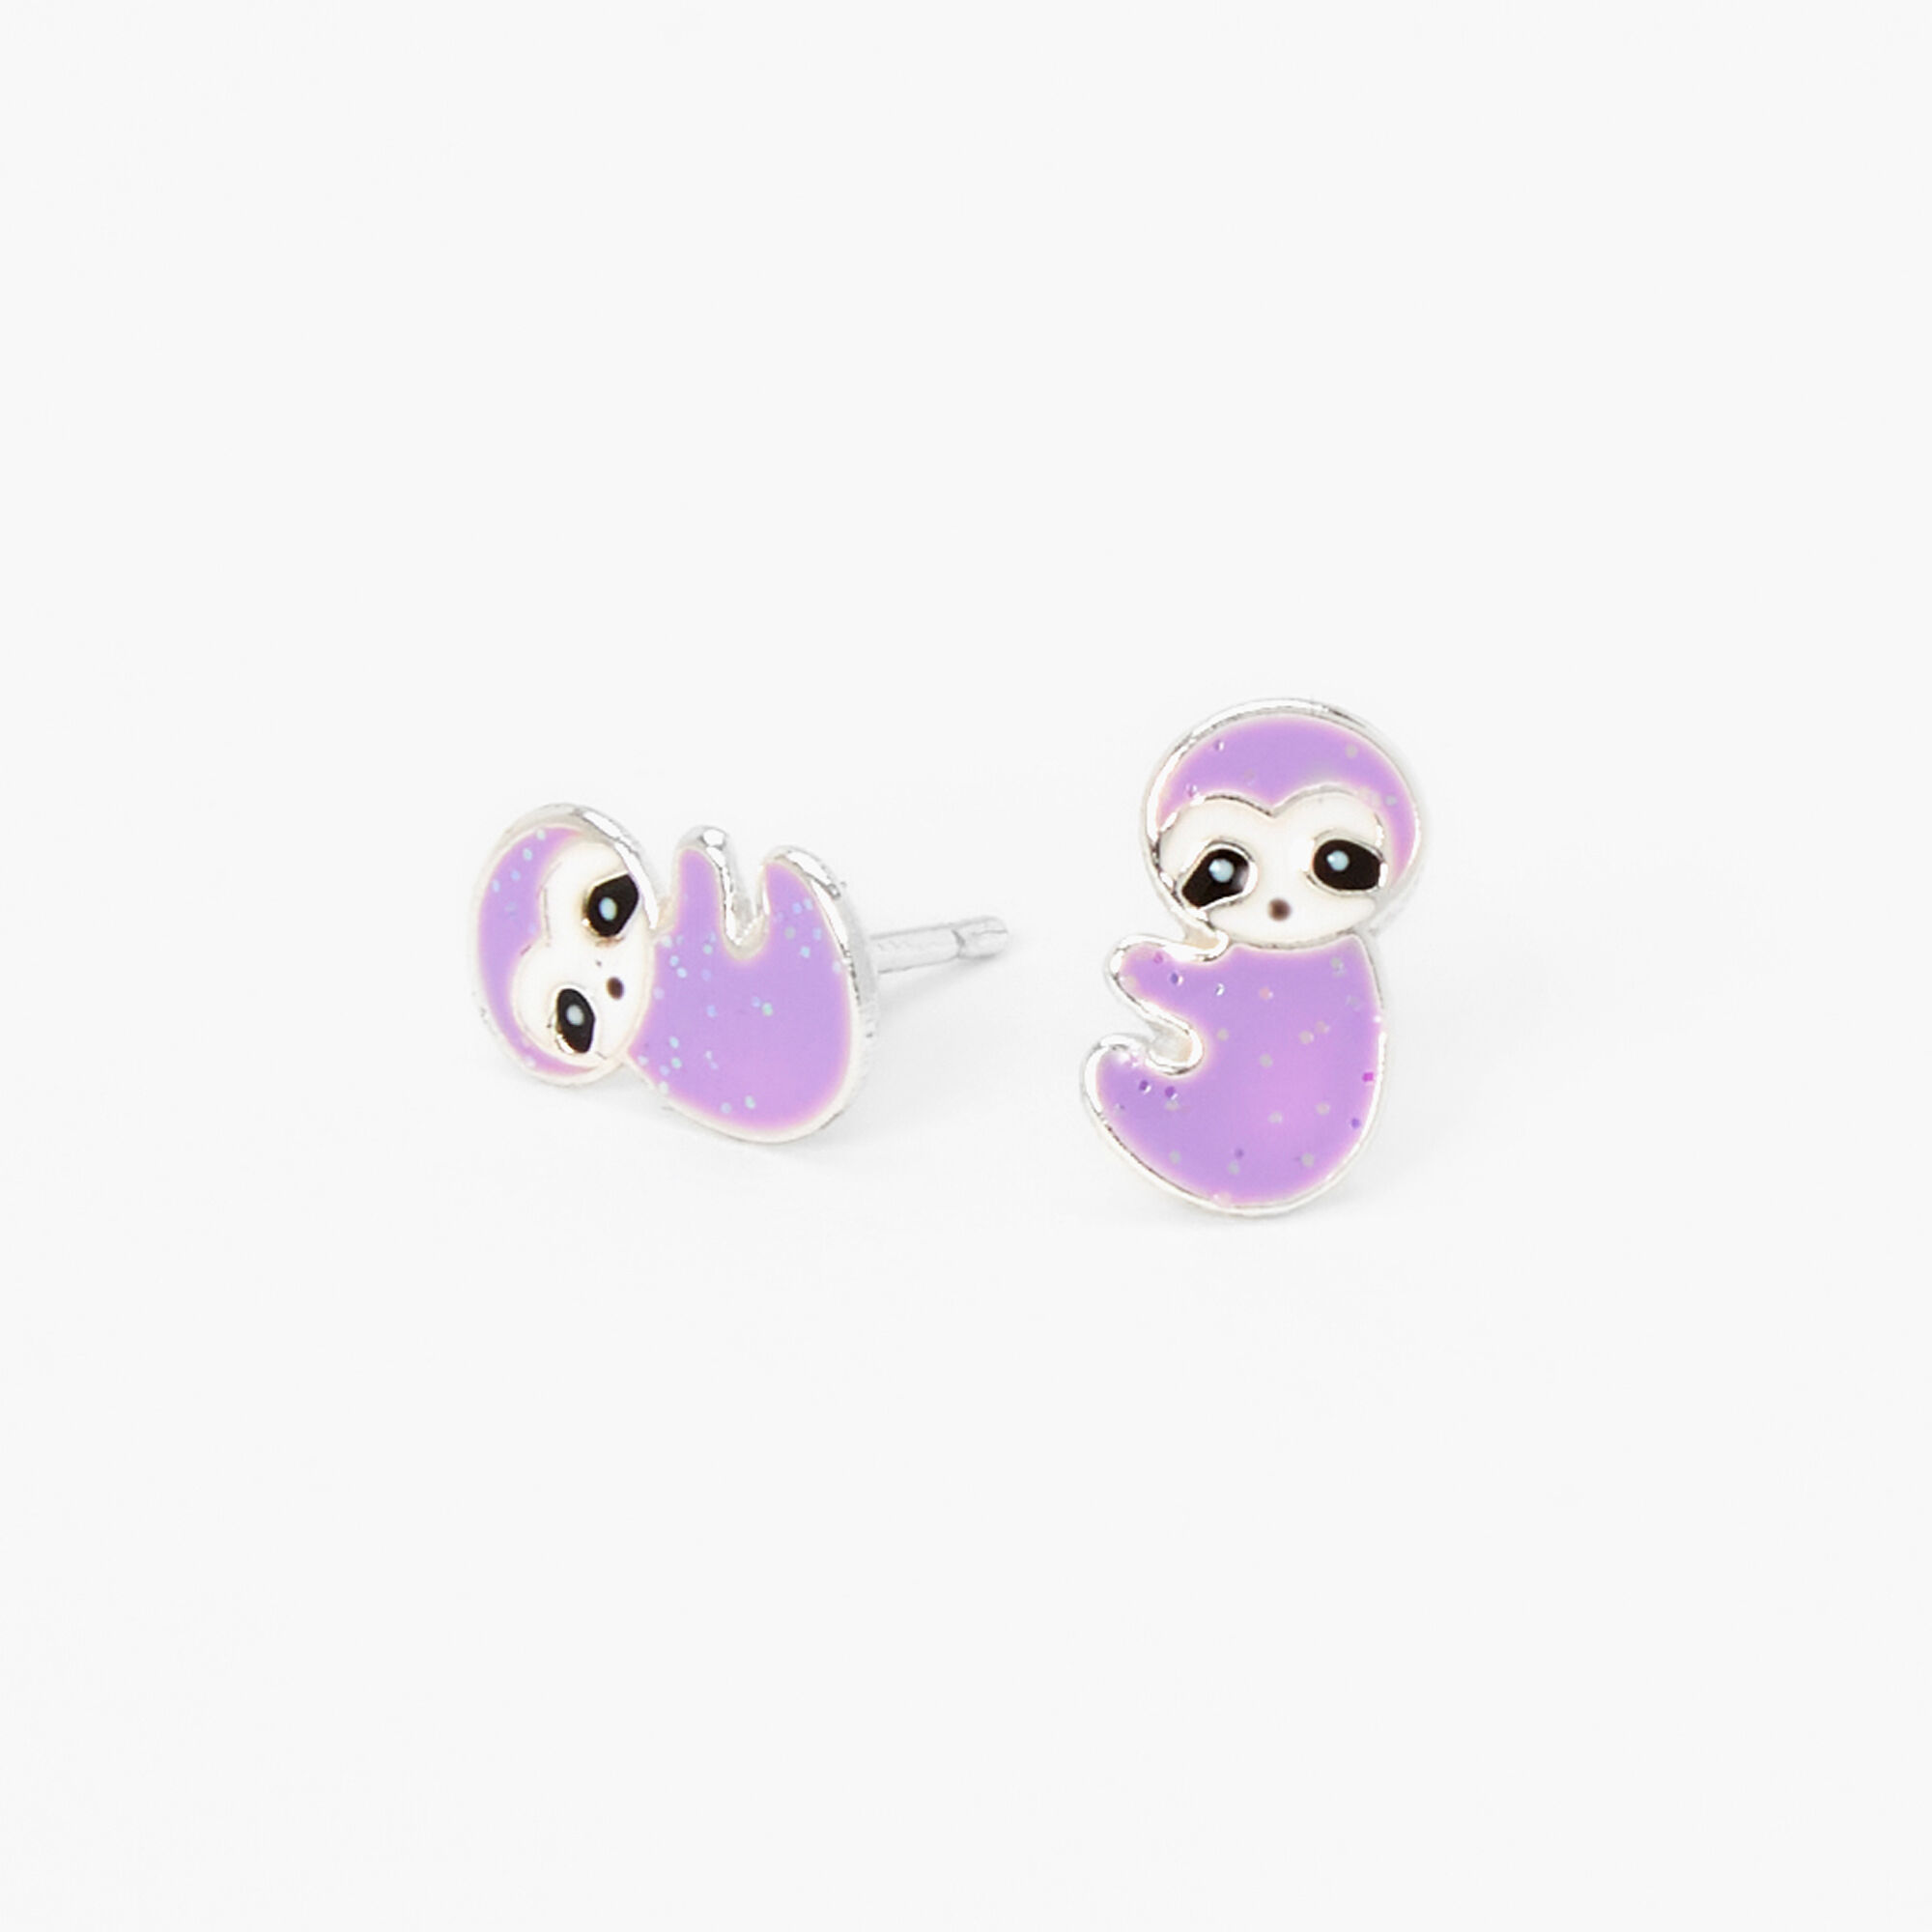 View Claires Glittery Purple Sloth Stud Earrings Silver information